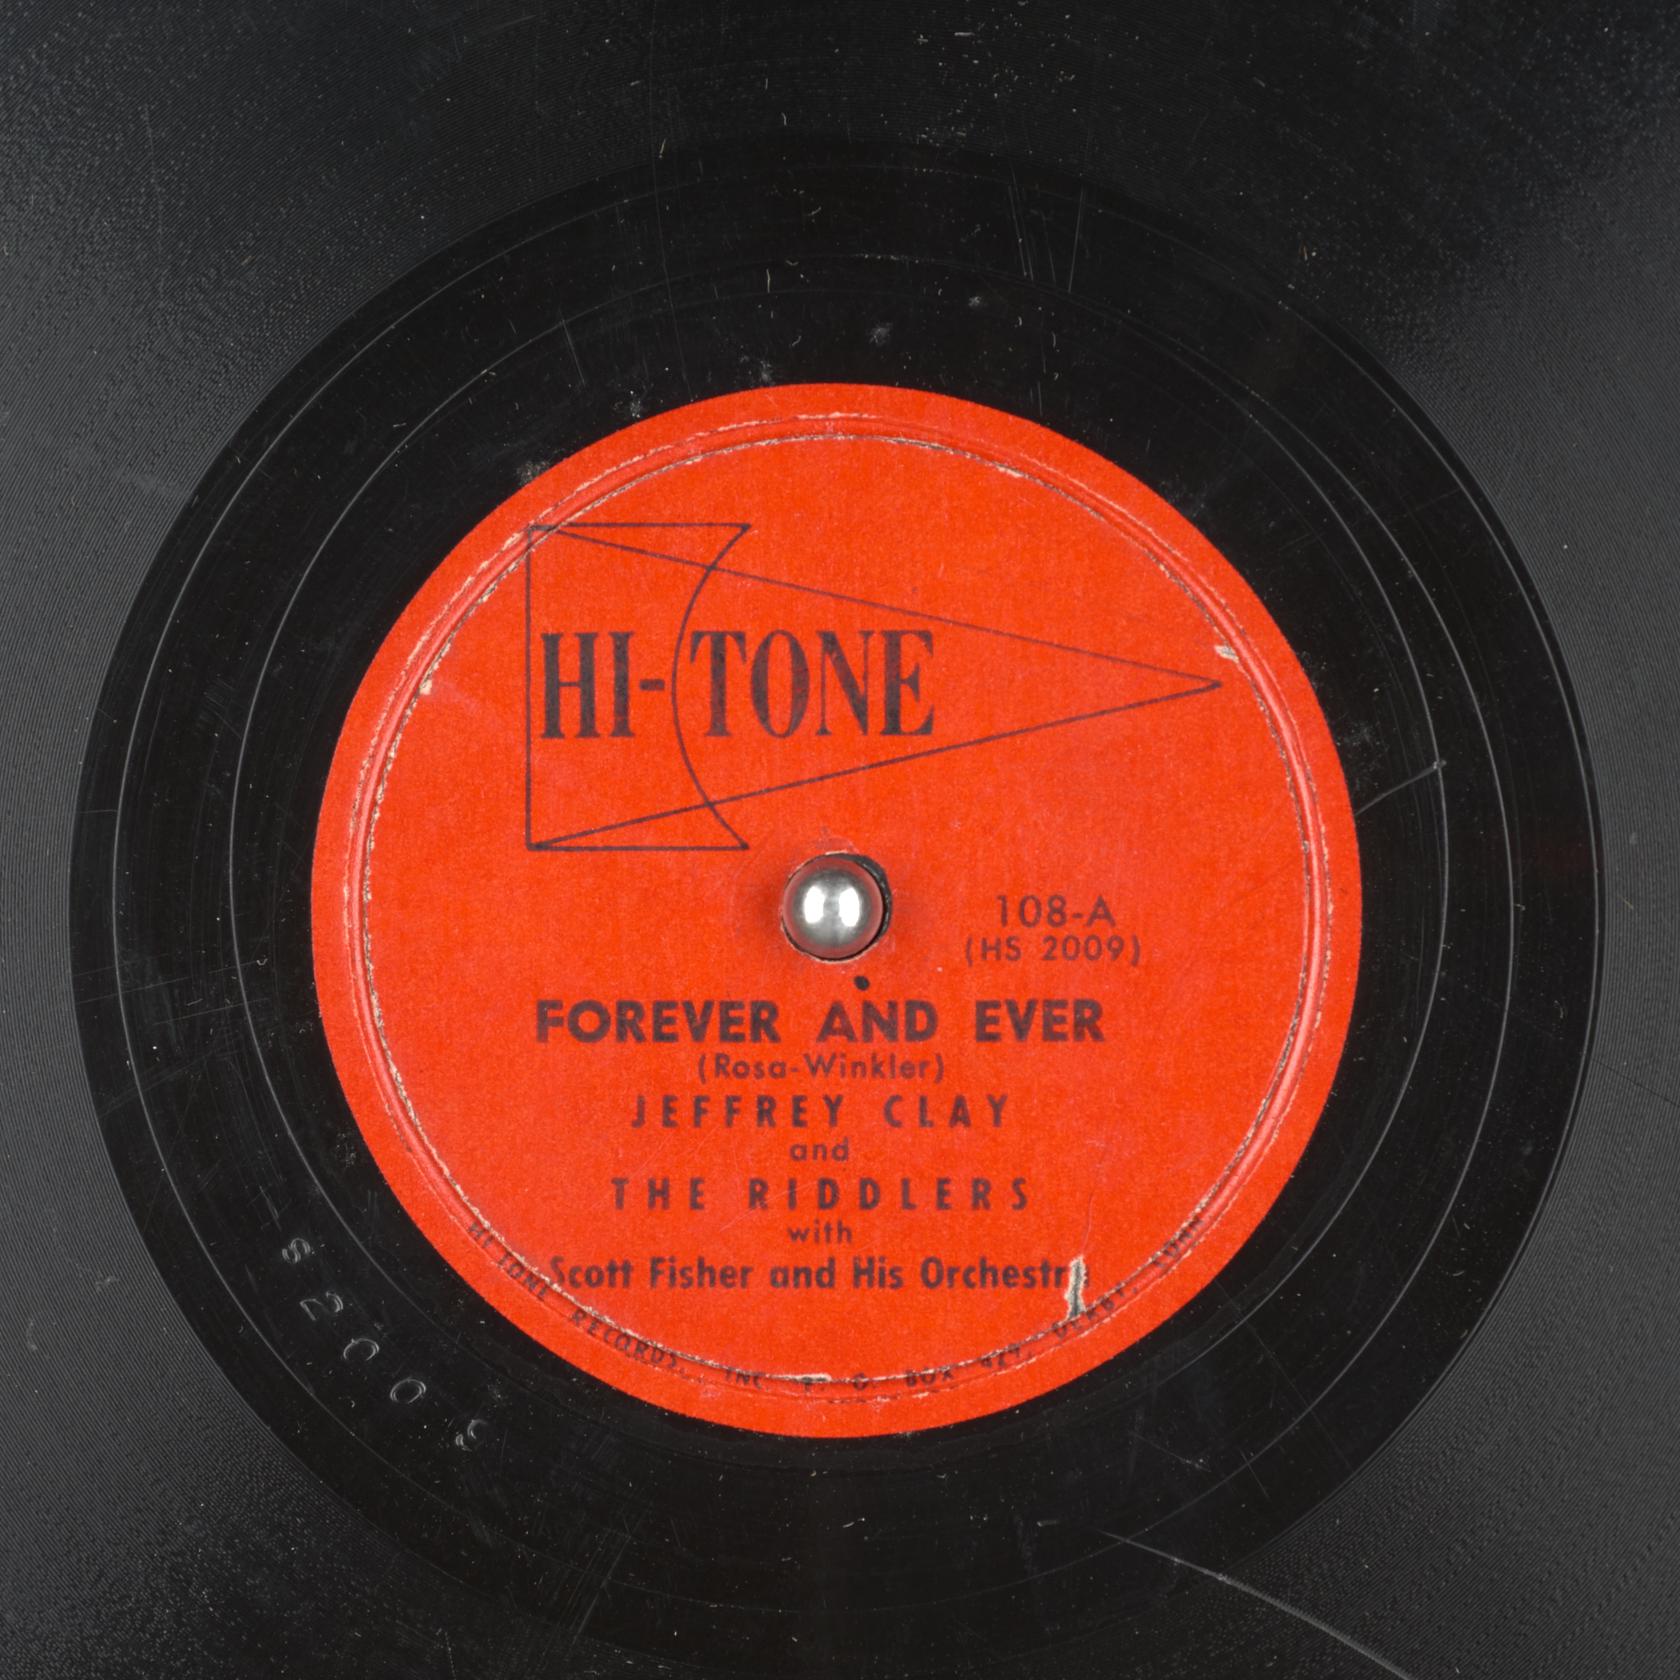 Forever And Ever - Scott Fisher And His Orchestra